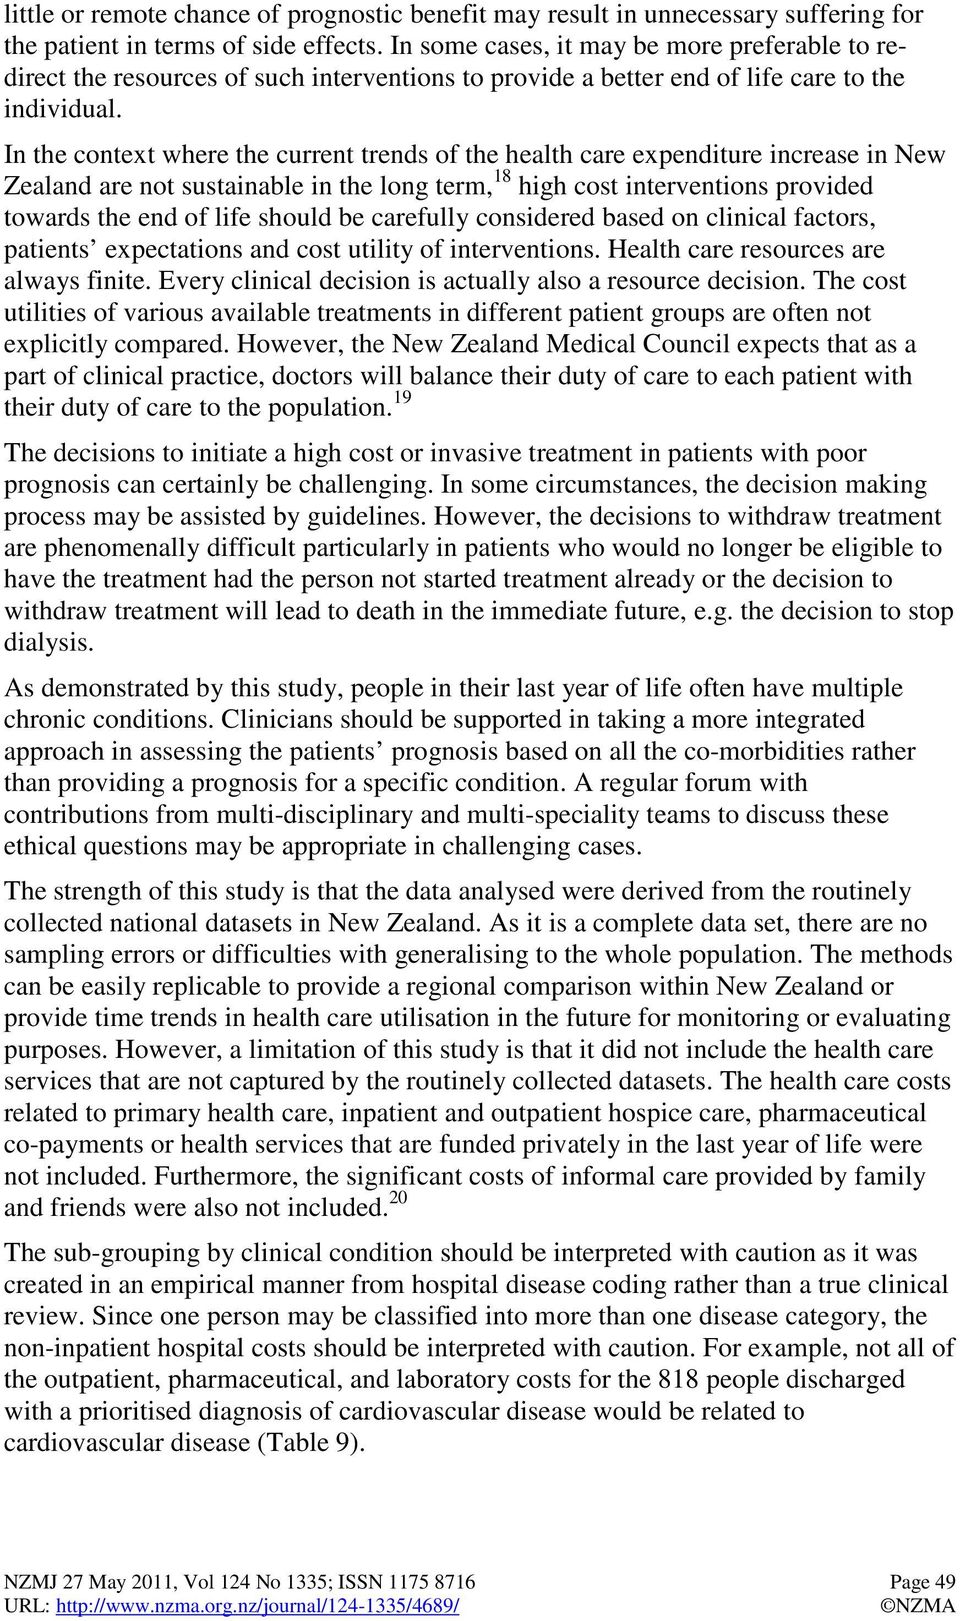 In the context where the current trends of the health care expenditure increase in New Zealand are not sustainable in the long term, 18 high cost interventions provided towards the end of life should